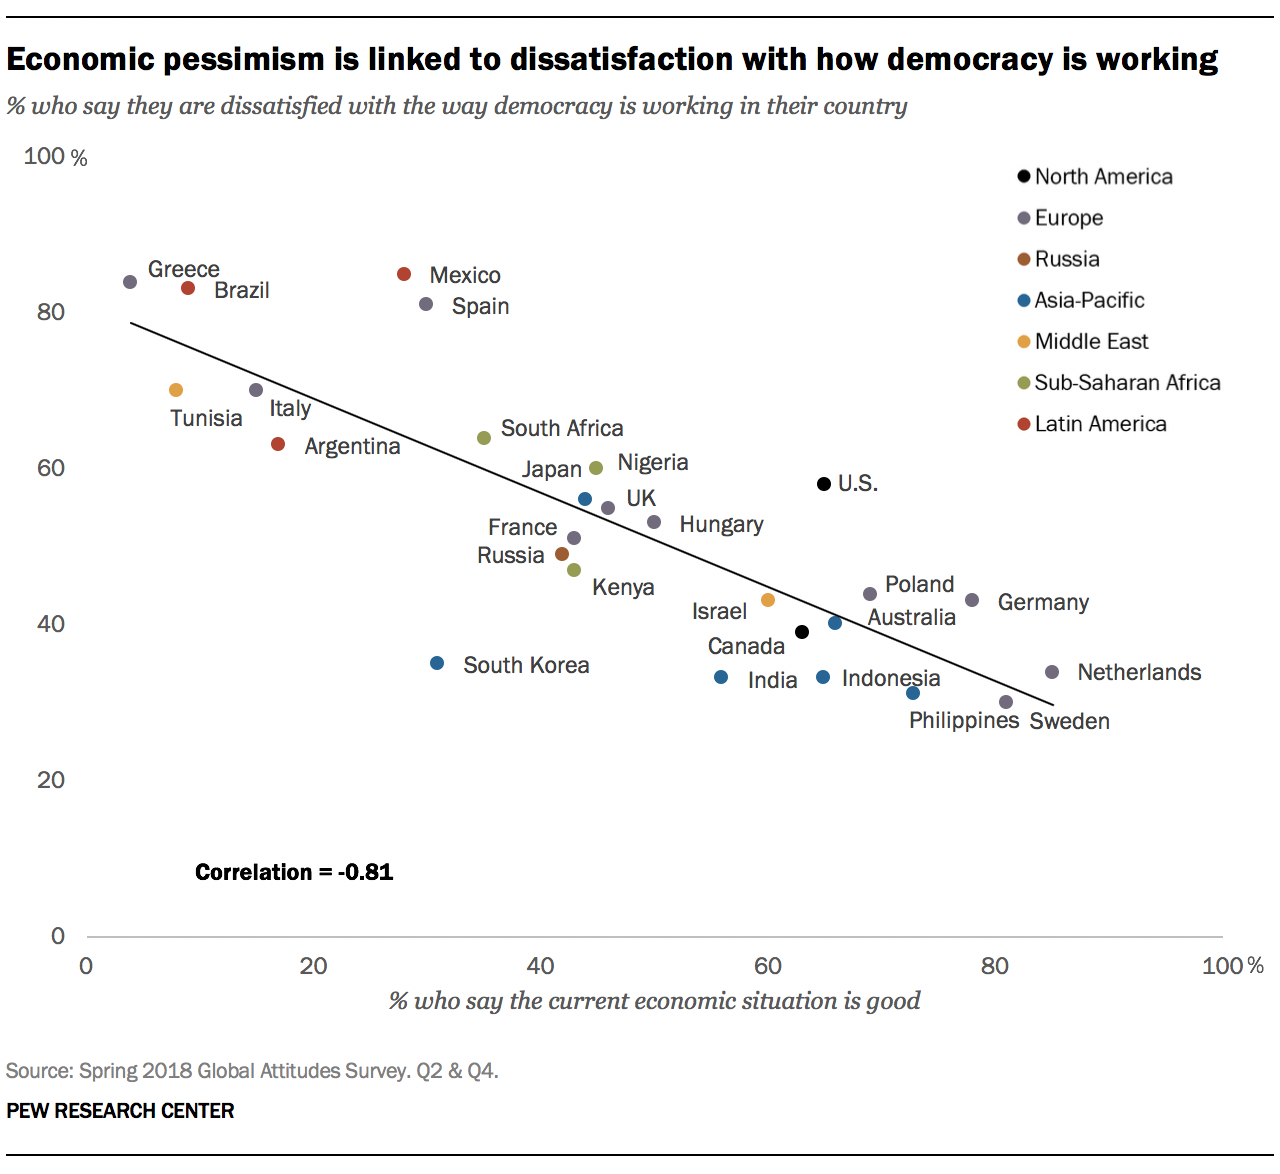 Economic pessimism is linked to dissatisfaction with how democracy is working